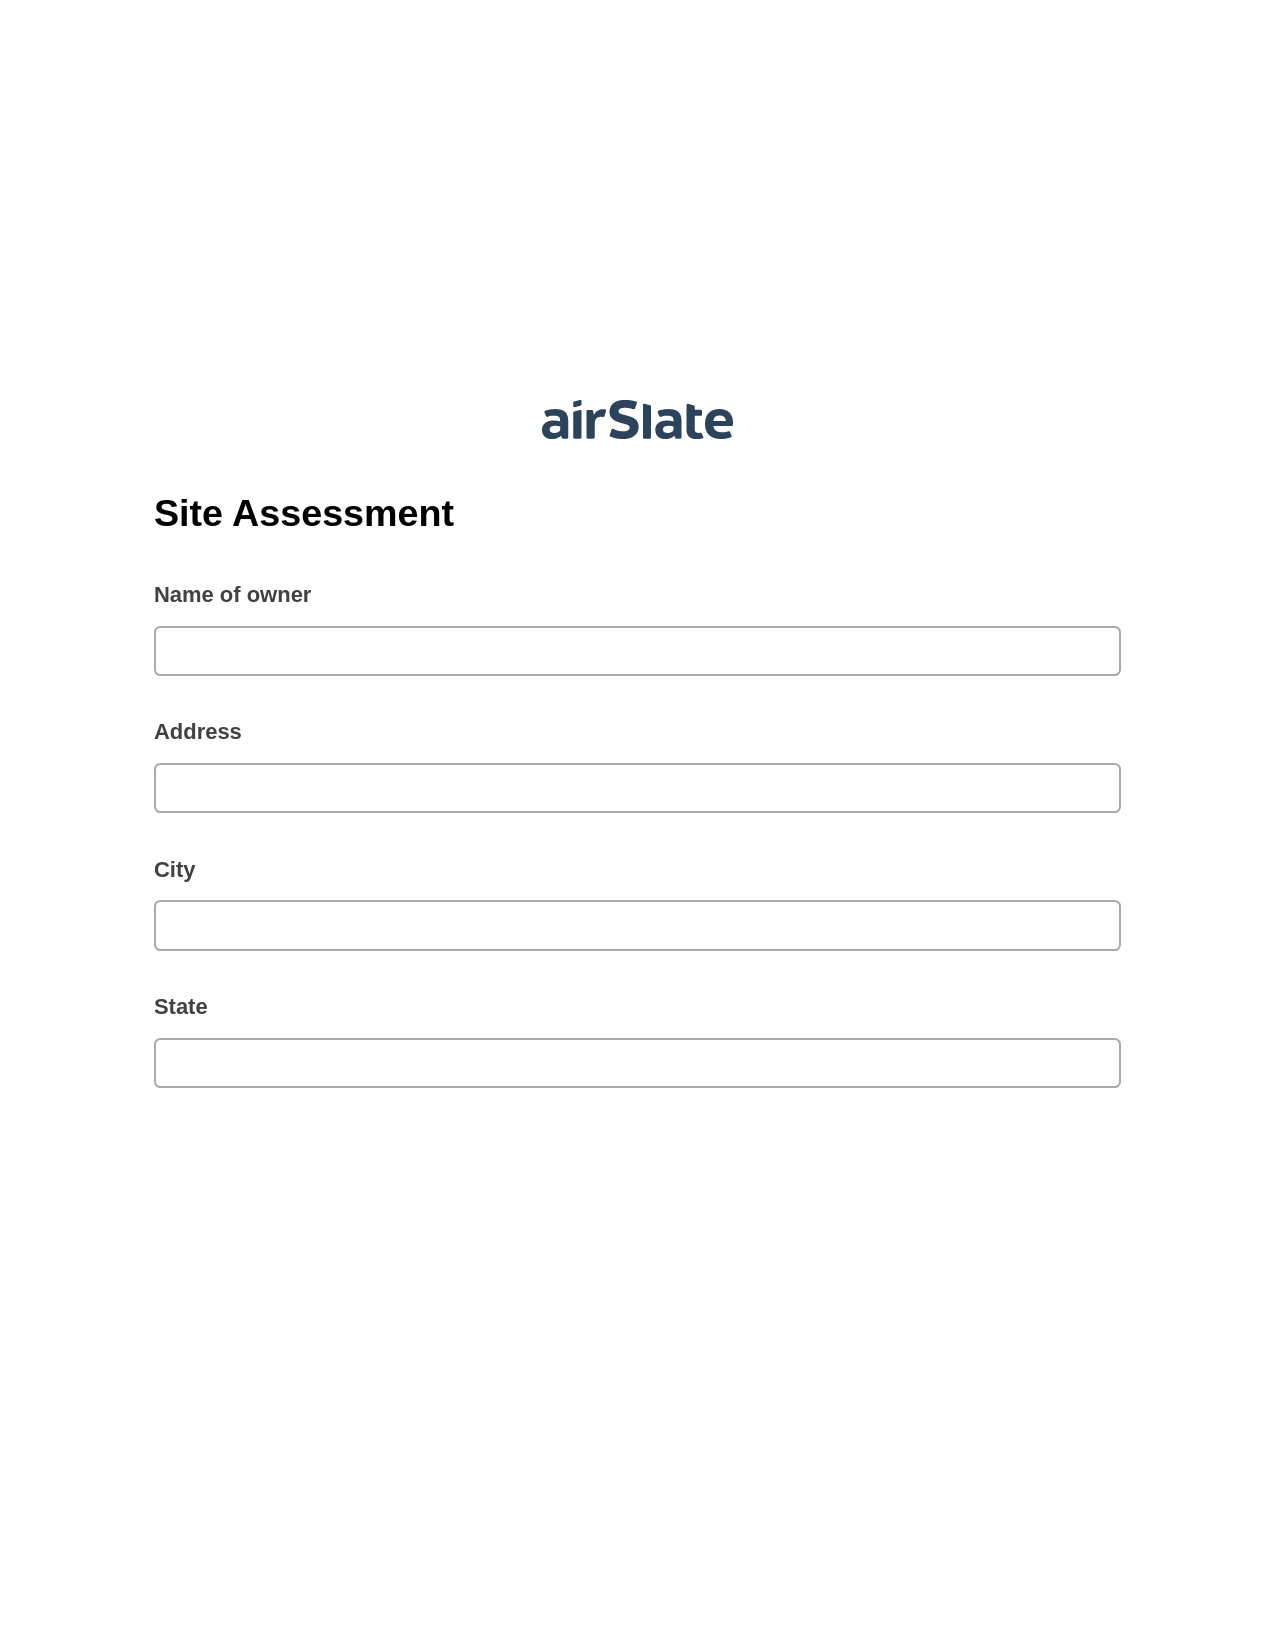 Multirole Site Assessment Pre-fill Slate from MS Dynamics 365 Records Bot, Assign Roles to Recipients Bot, OneDrive Bot